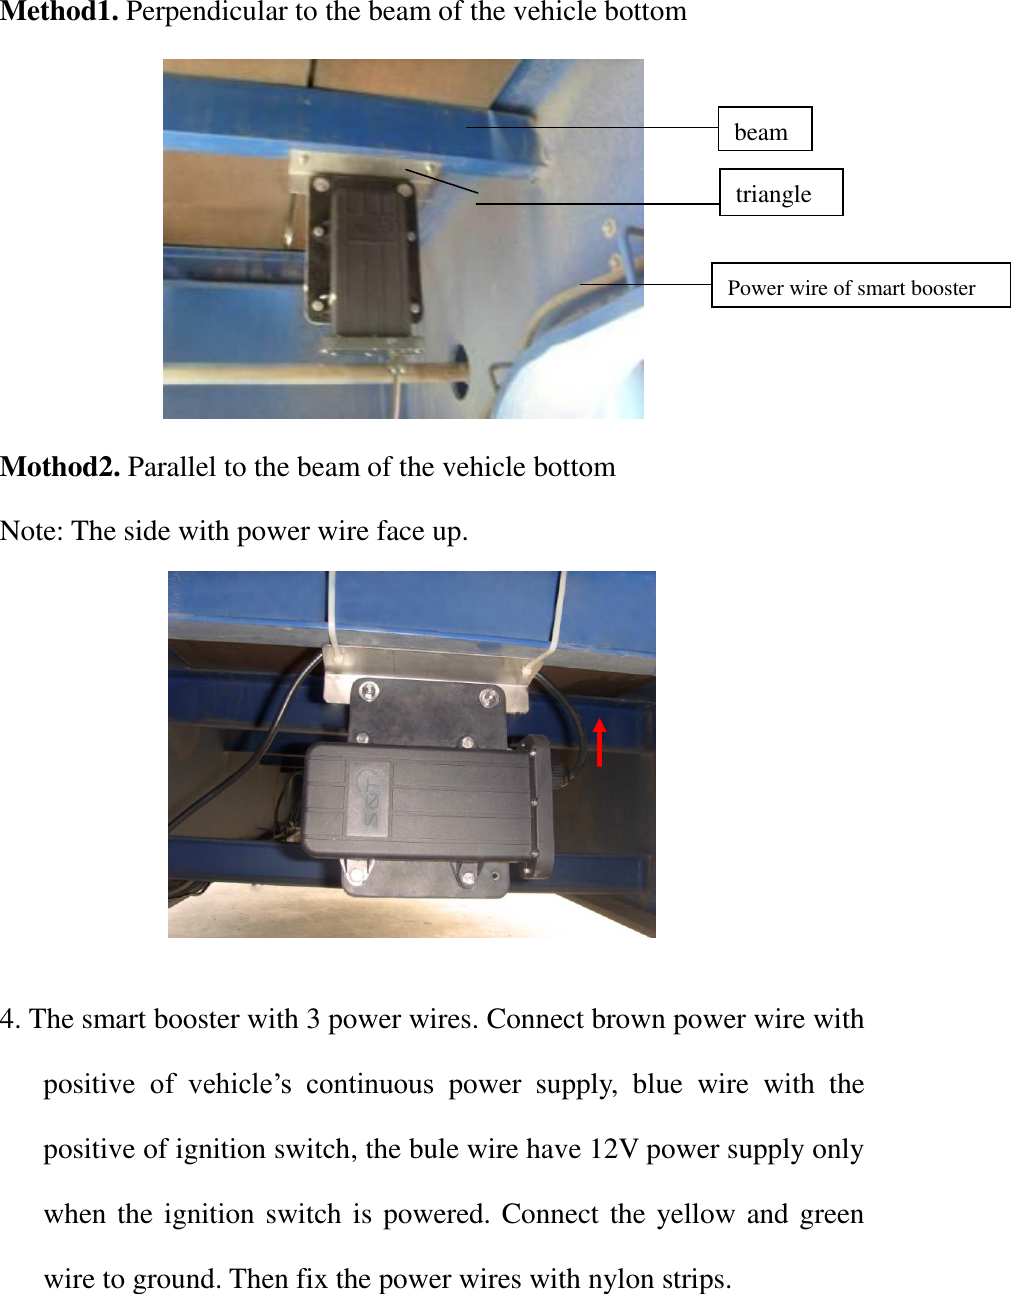 Method1. Perpendicular to the beam of the vehicle bottom            Mothod2. Parallel to the beam of the vehicle bottom Note: The side with power wire face up.              4. The smart booster with 3 power wires. Connect brown power wire with positive  of  vehicle’s  continuous  power  supply,  blue  wire  with  the positive of ignition switch, the bule wire have 12V power supply only when the ignition switch is powered. Connect the yellow and green wire to ground. Then fix the power wires with nylon strips.    beam triangle Power wire of smart booster 